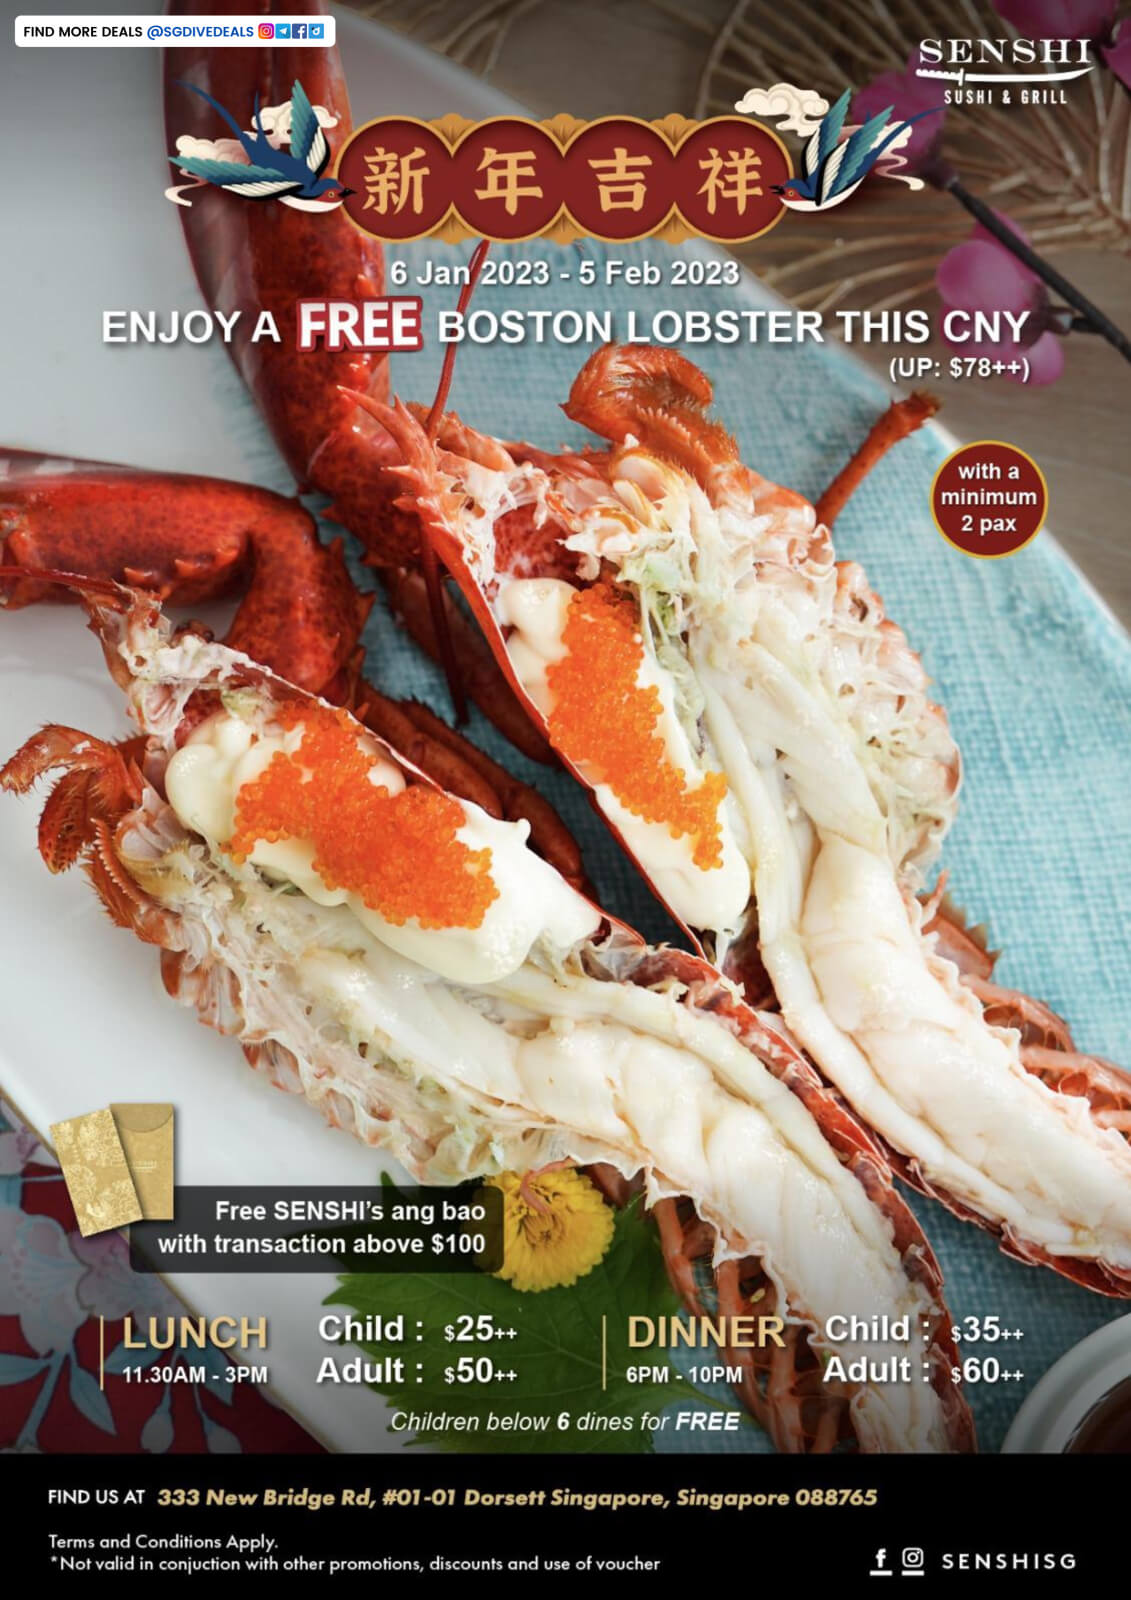 Senshi Sushi & Grill,Free Boston Lobster when you dine in